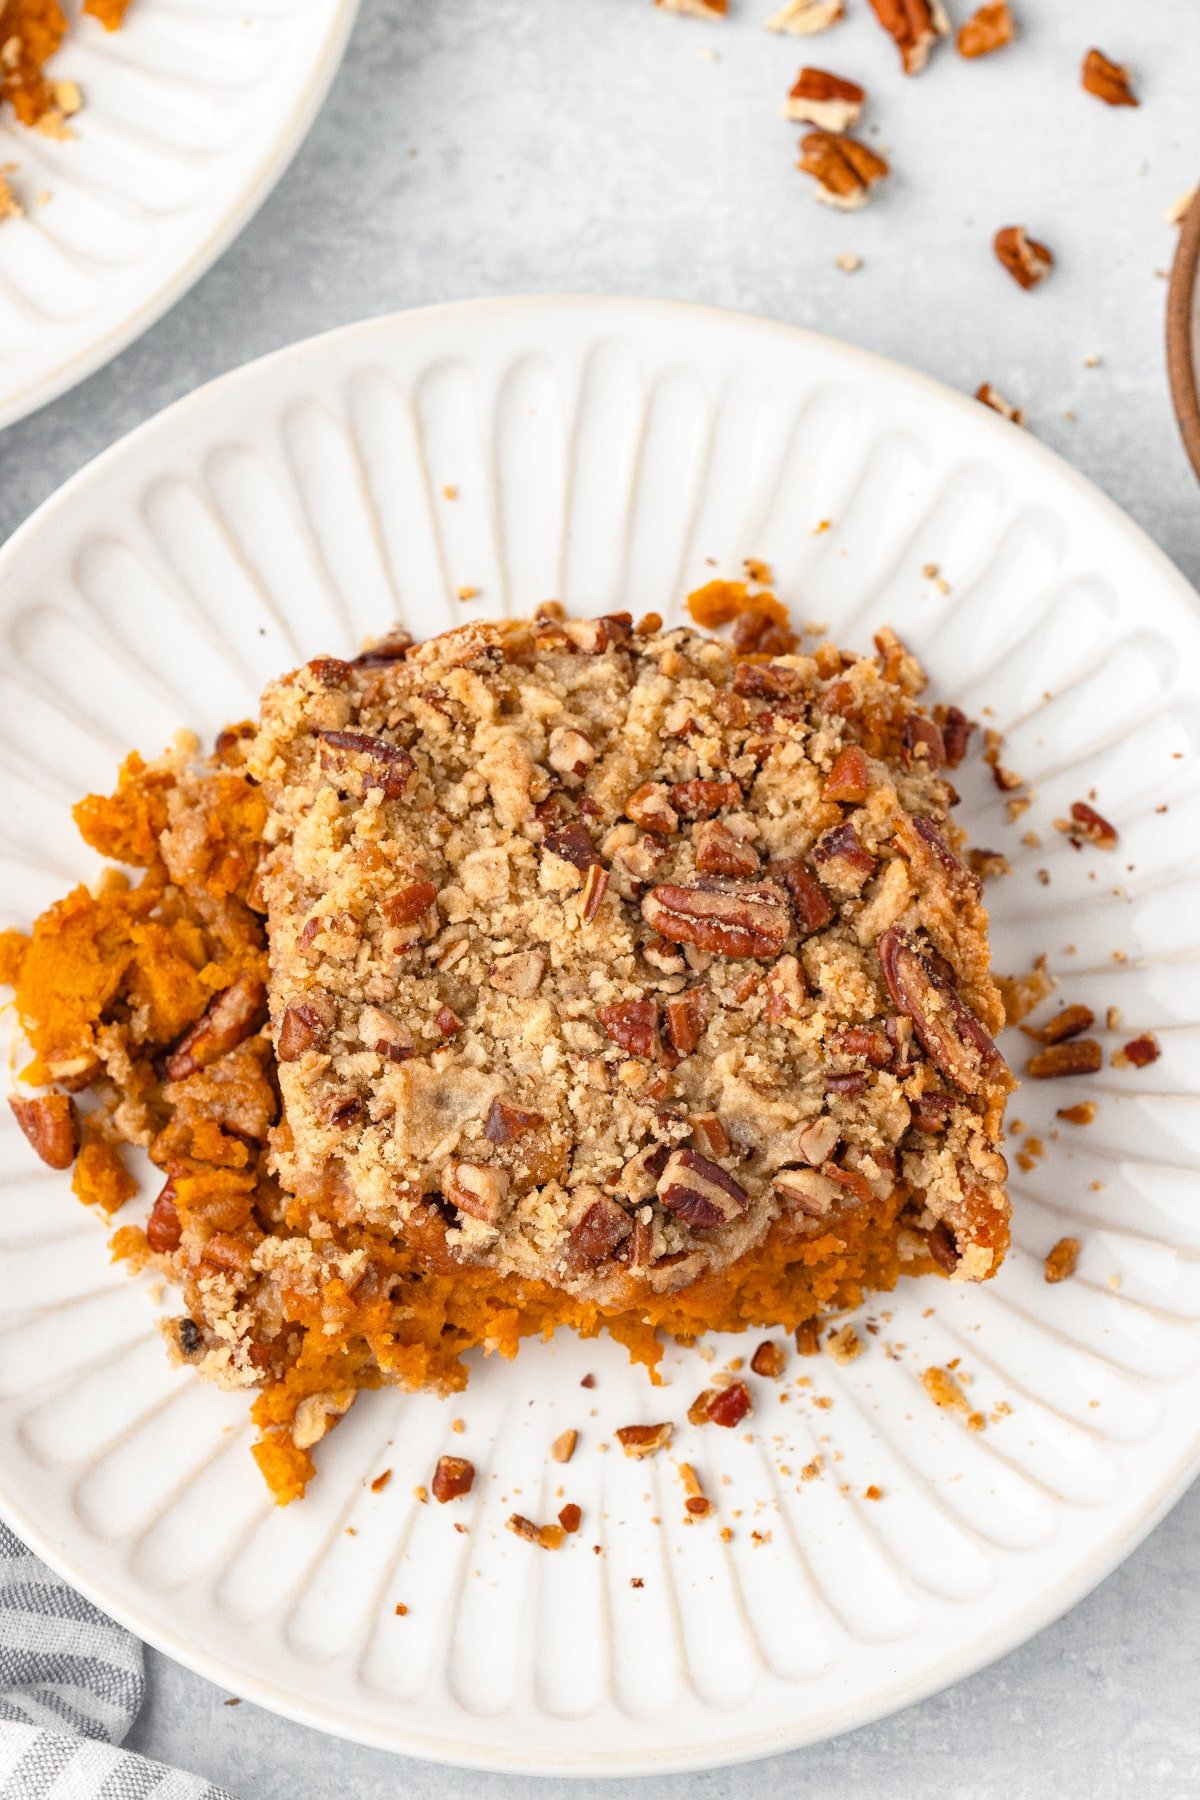 A serving of sweet potato casserole on a white plate.